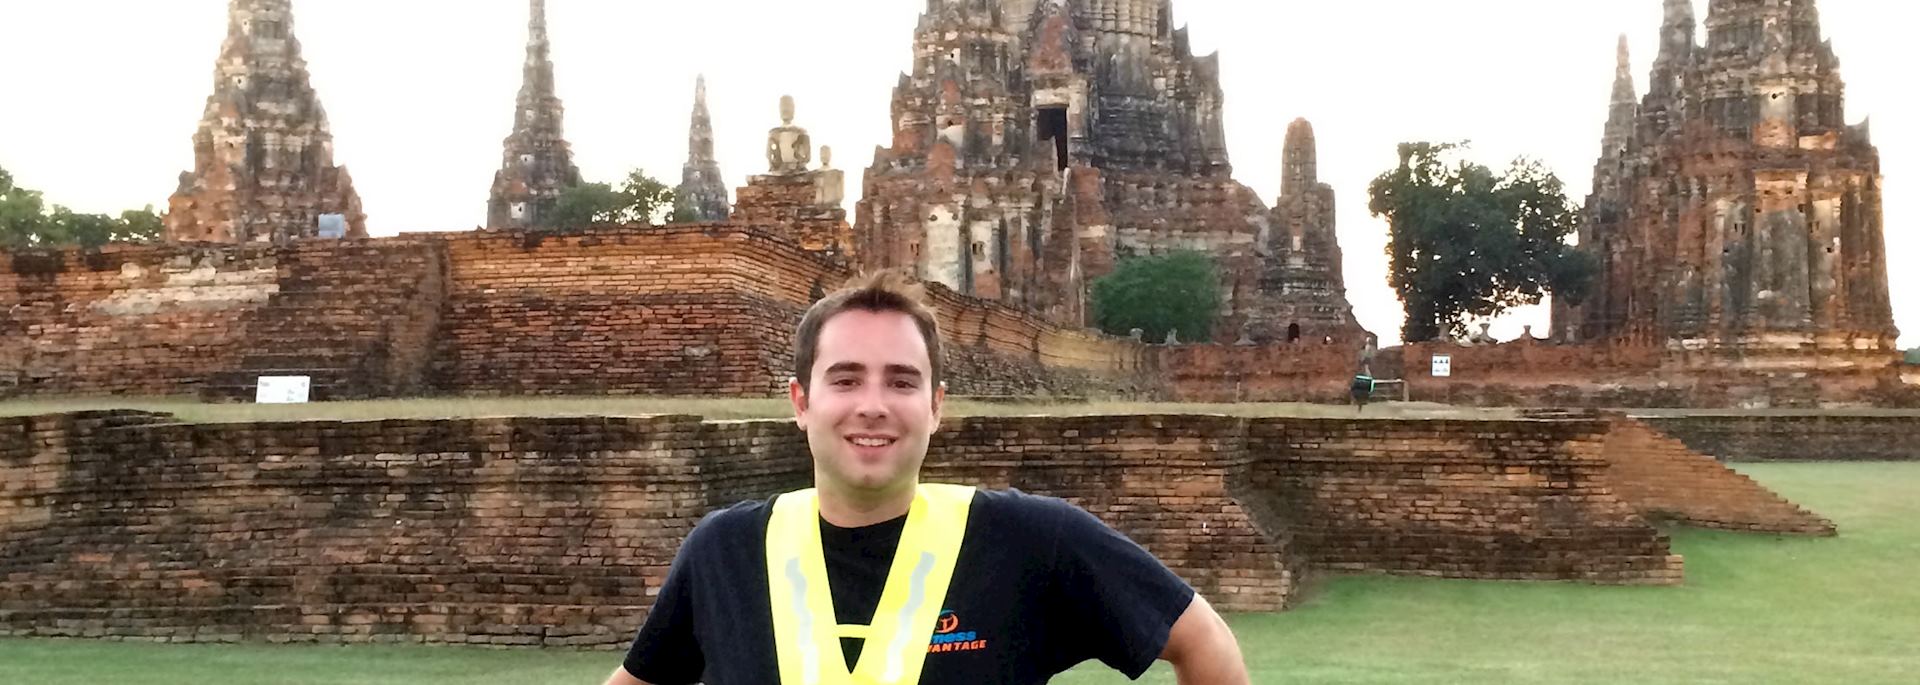 Matt on a bicycle excursion stops off at one of the ancient temples in Ayutthaya, Thailand